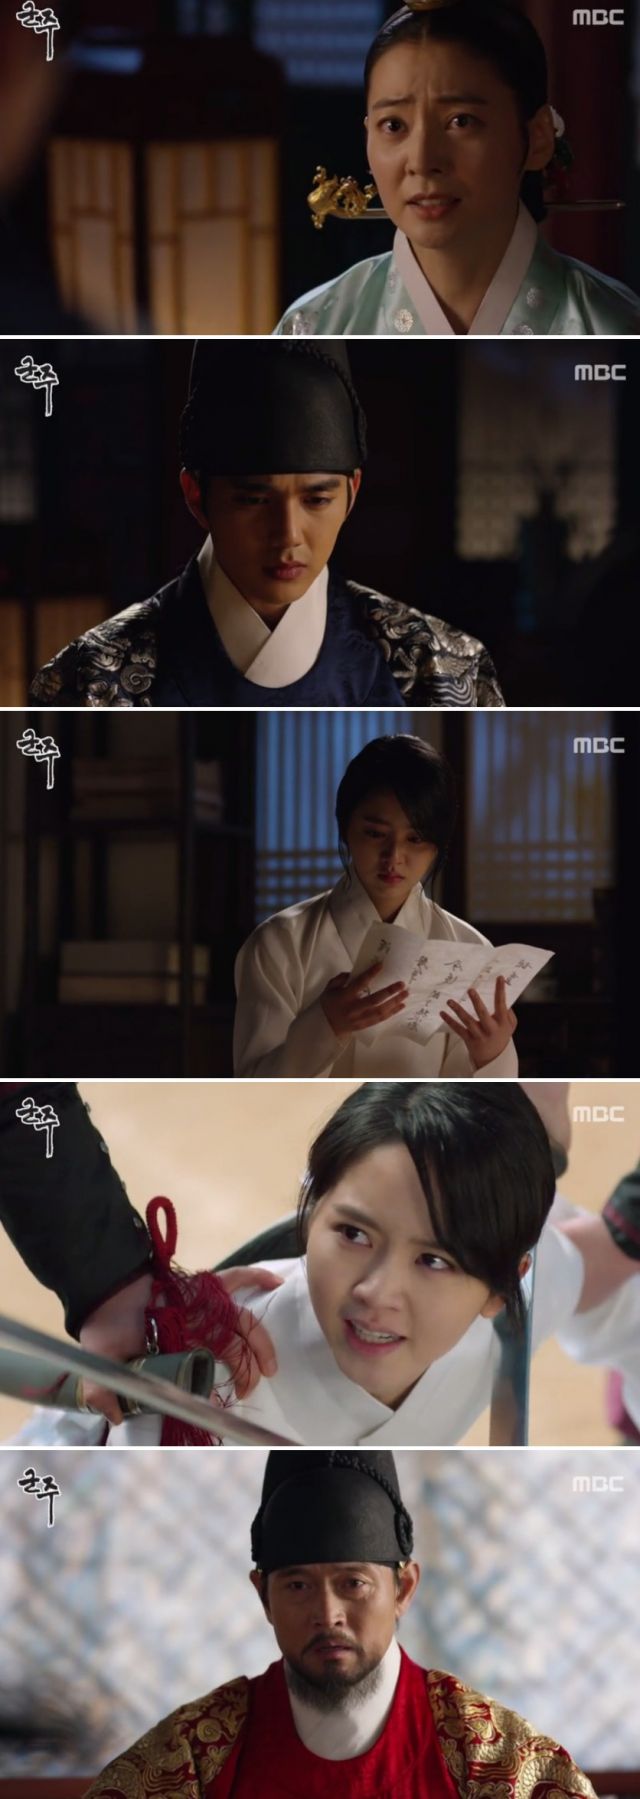 episodes 7 and 8 captures for the Korean drama 'Ruler: Master of the Mask'